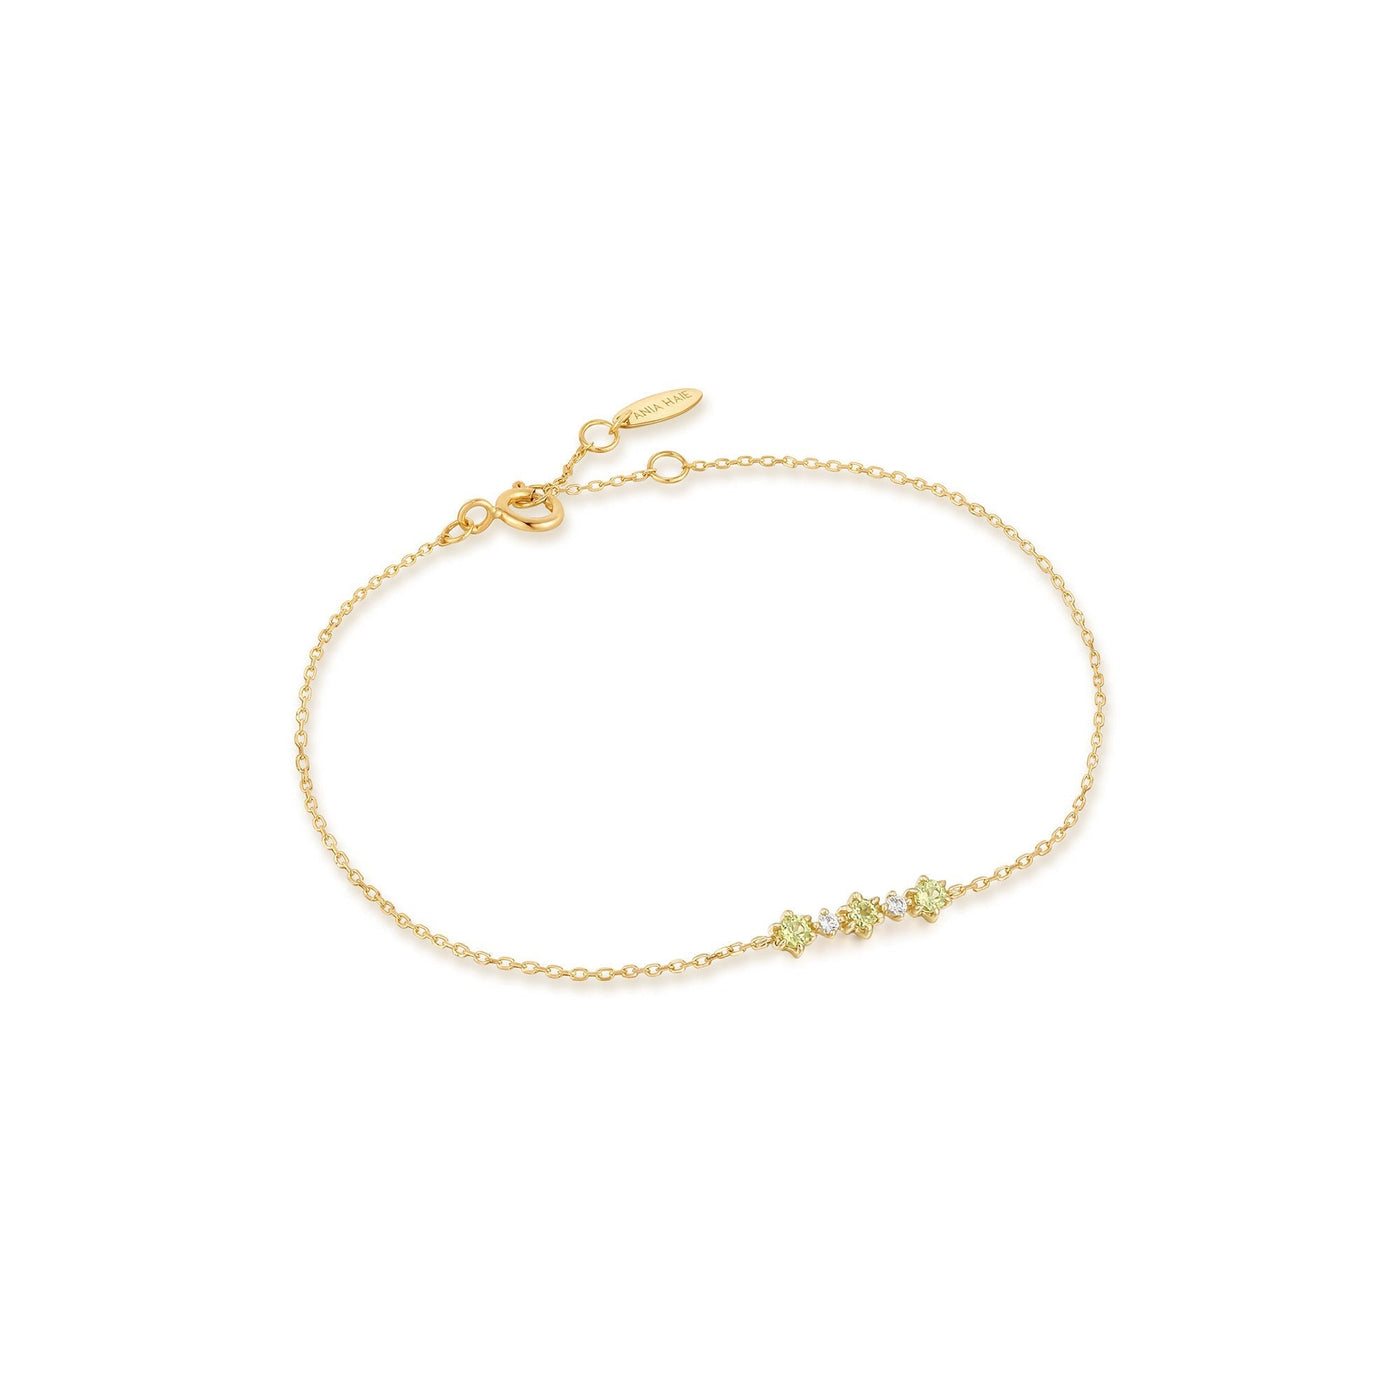 Ania Haie 14kt Gold Peridot and White Sapphire Bracelet